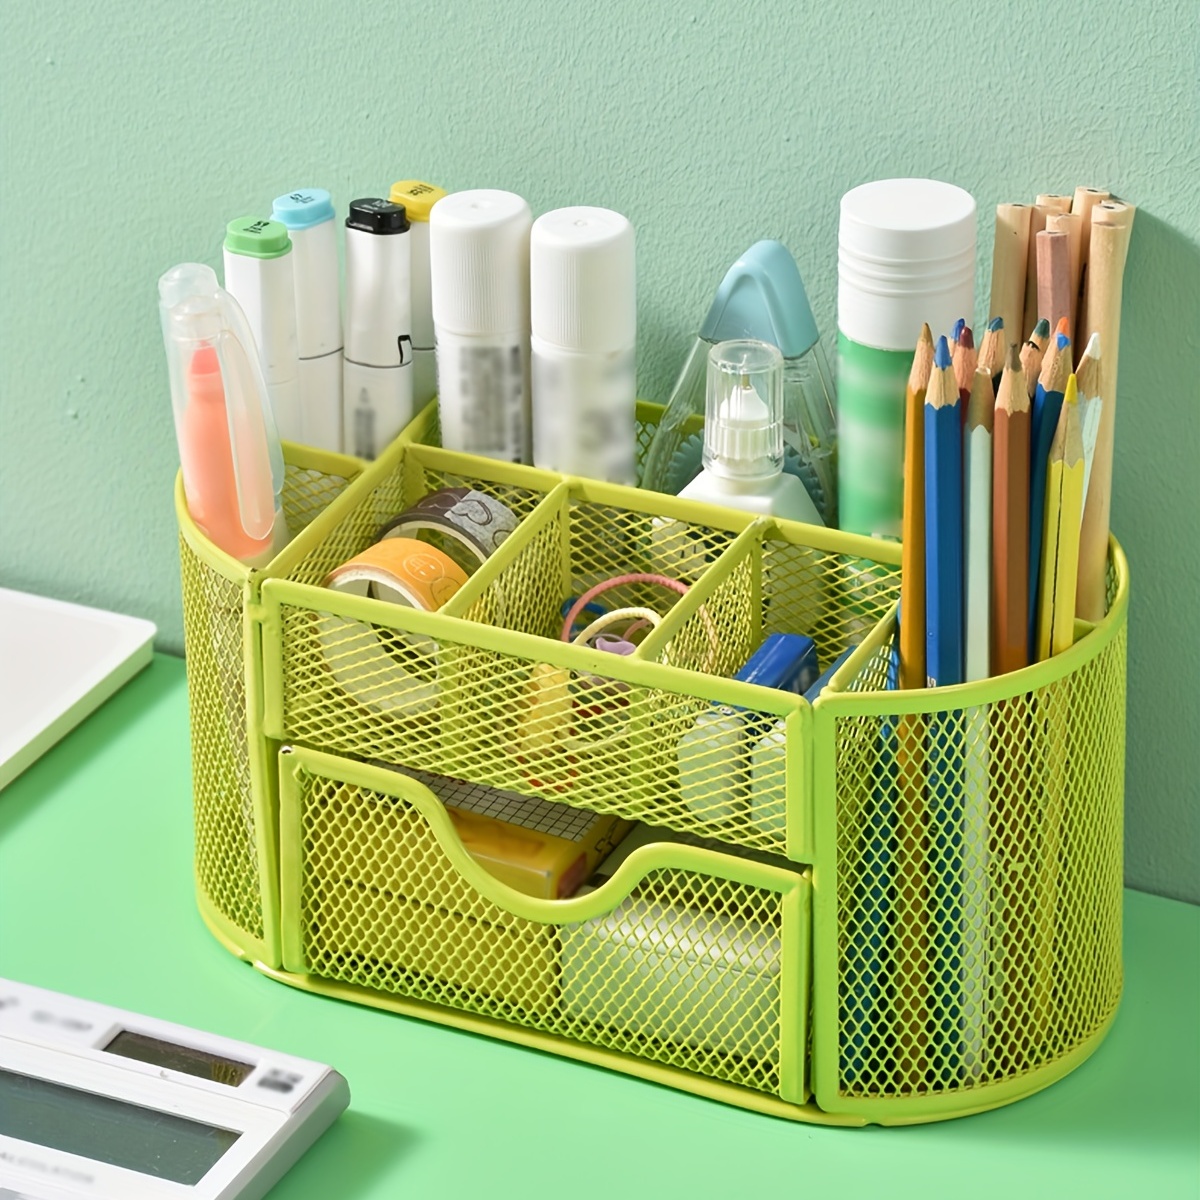 Pipishell Desk Organizer Mesh Desktop Office Supplies Multi-functional  Caddy Pen Holder Stationery with 8 Compartments and 1 Drawer for Home,  School